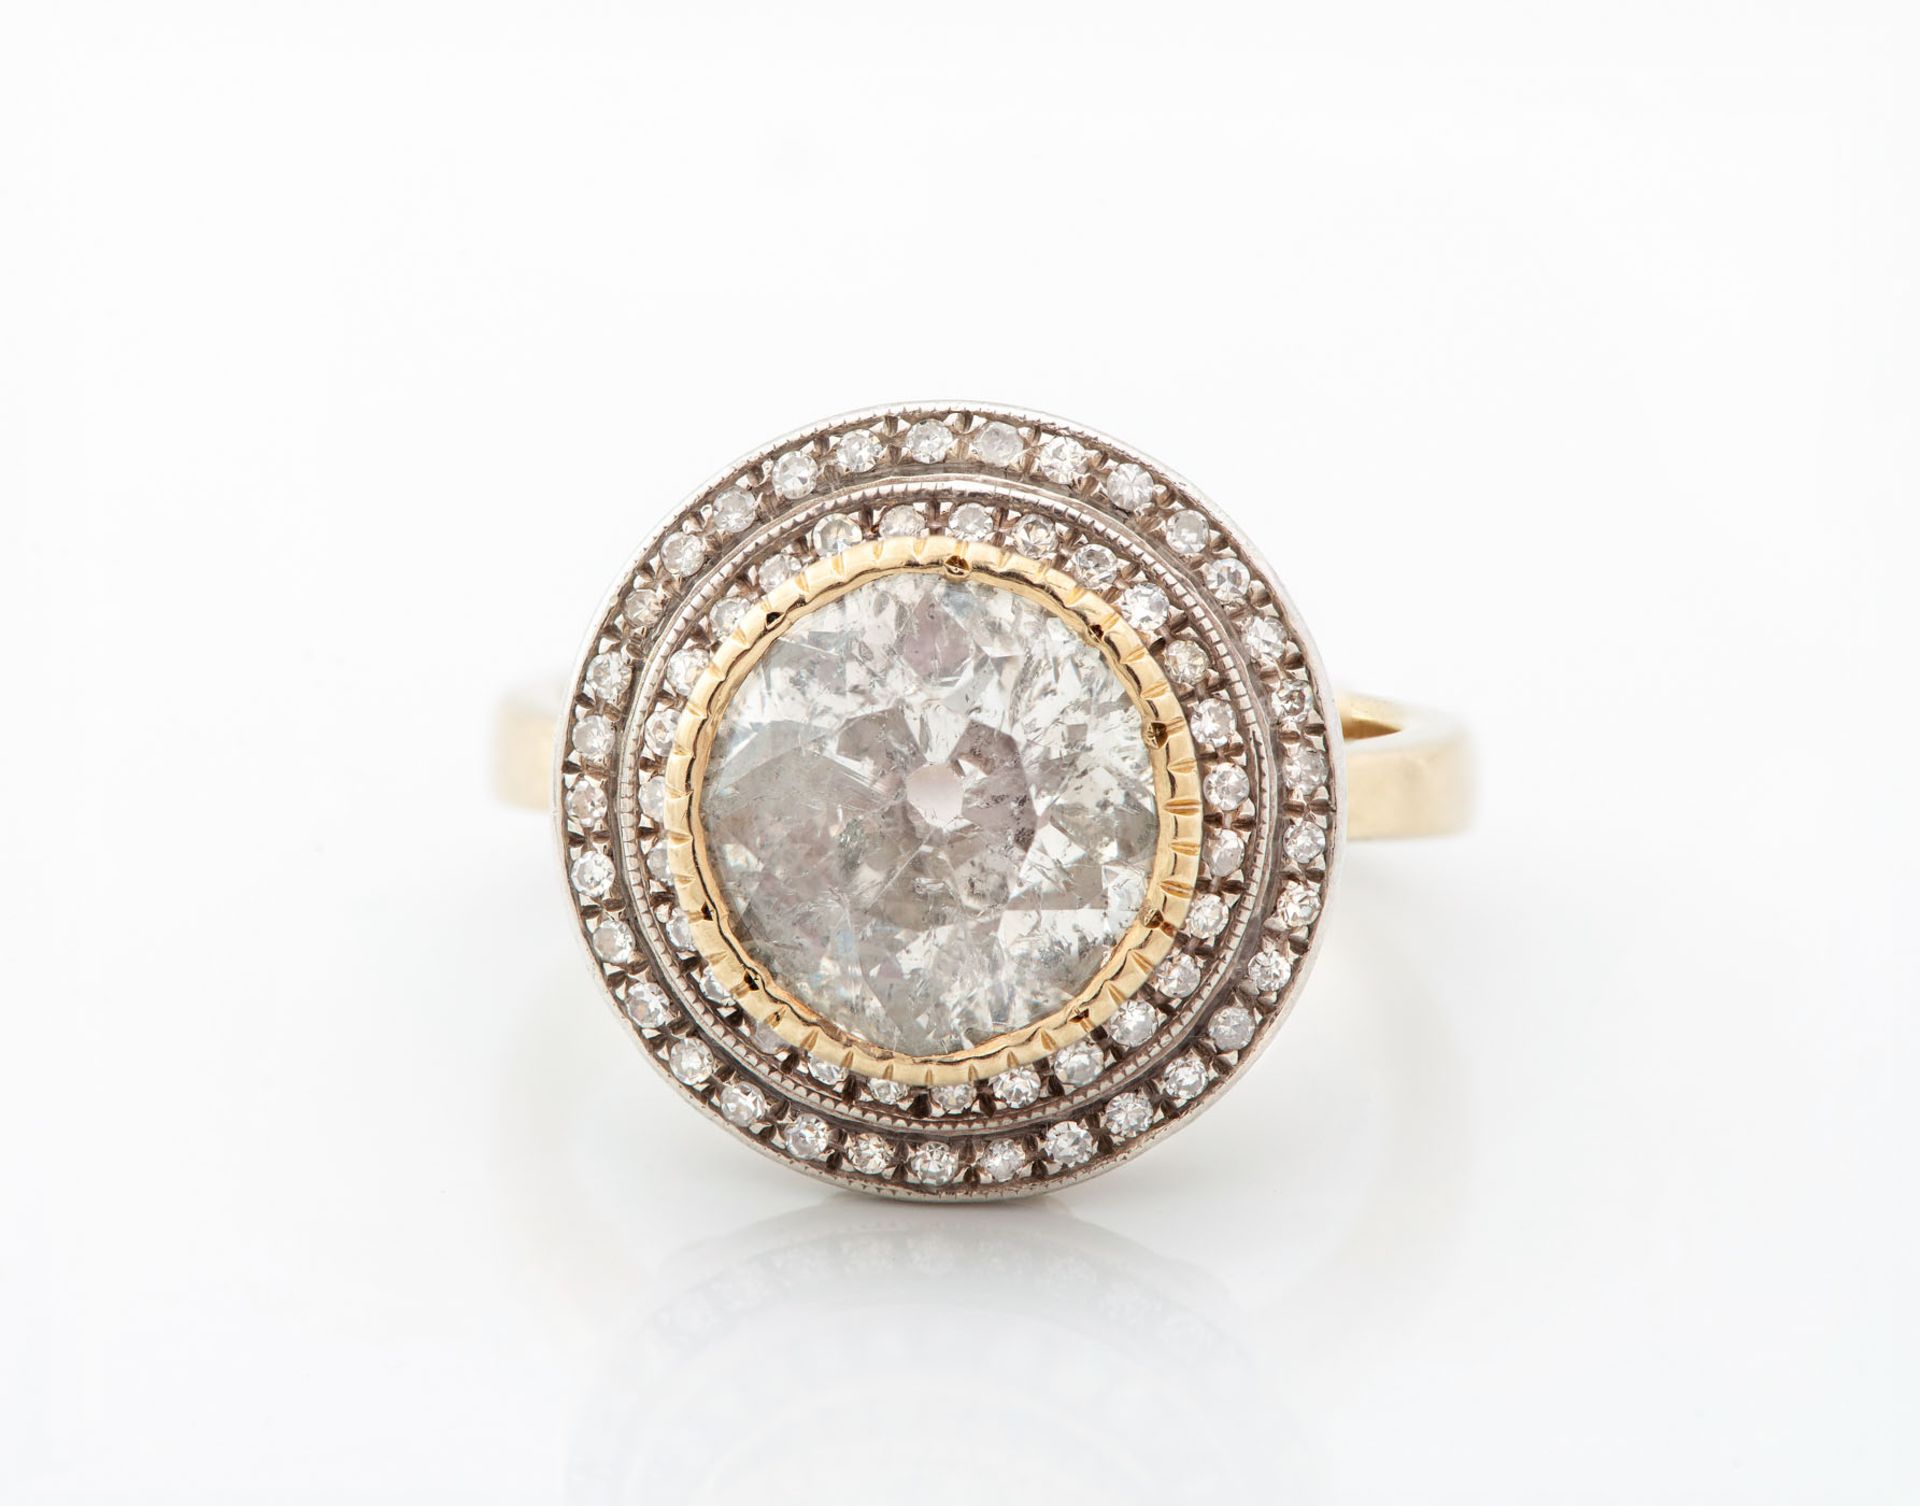 An 18K Two Tone Gold and Diamond Ring - Image 3 of 3